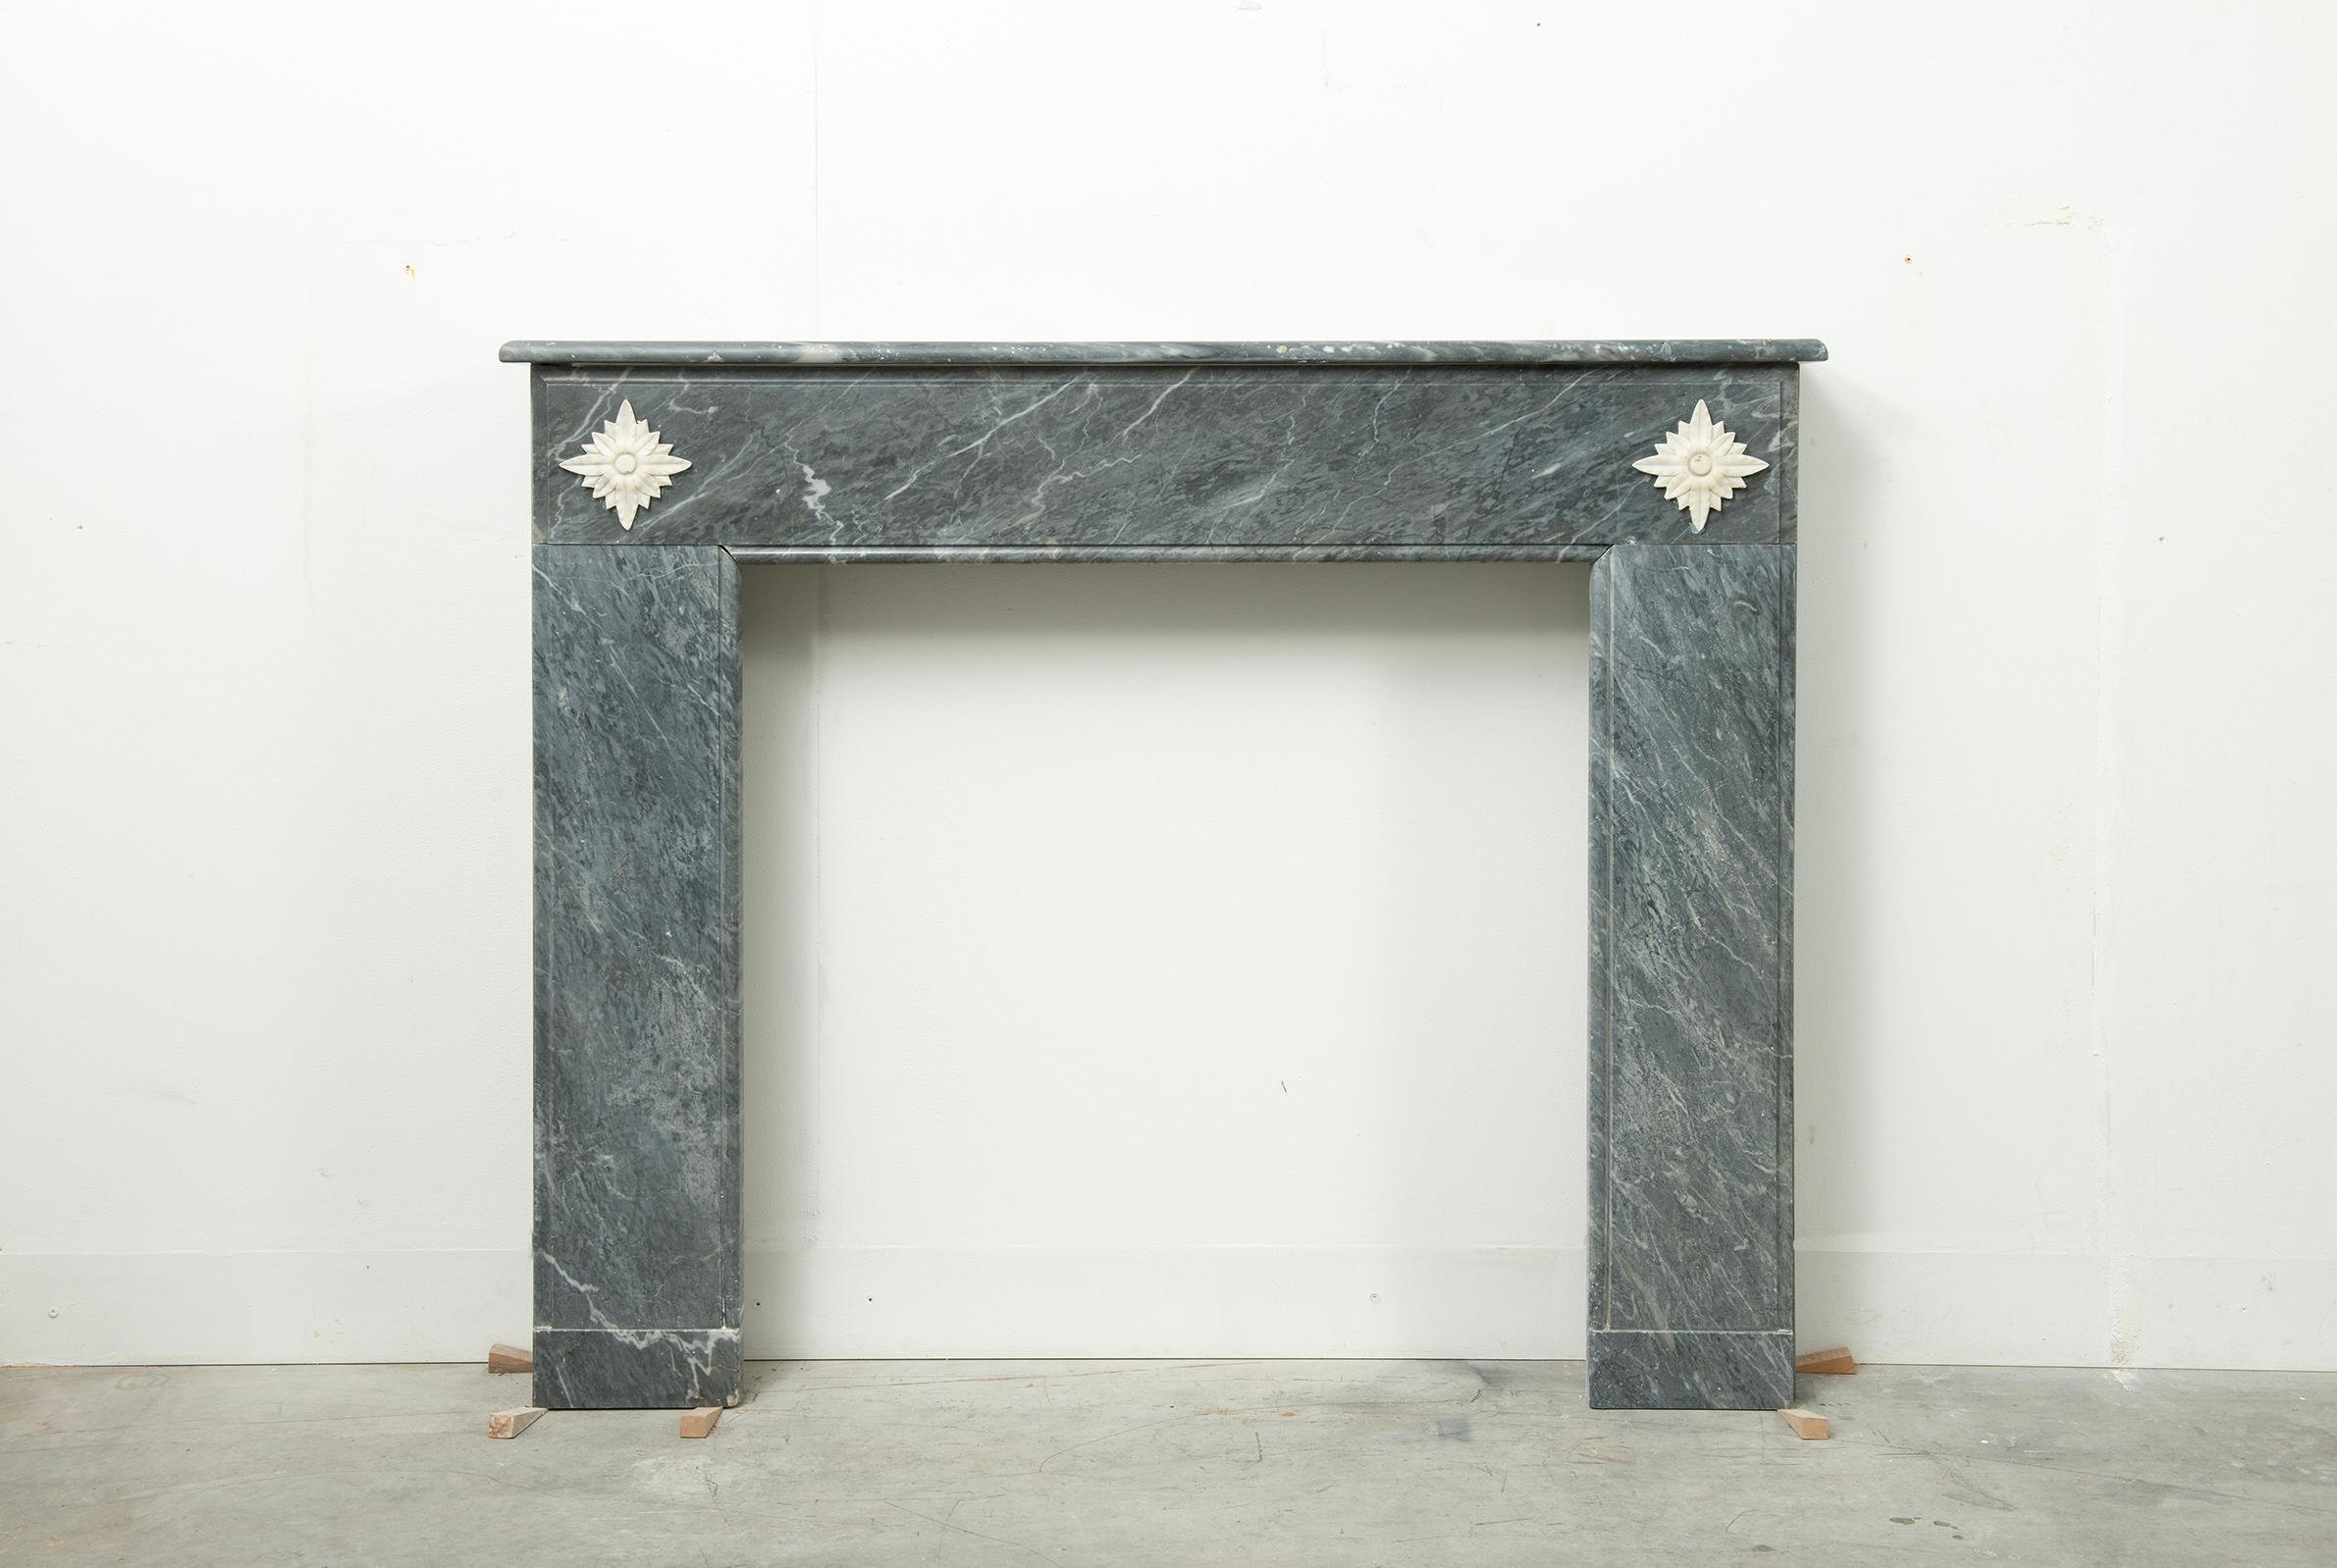 Little Grey Marble Louis XVI Fireplace Mantel

Nice and decorative mantelpiece executed in Bardiglio Grey marble with white Carrara Marble floral decorations.

The nice rounded topshelf show the perfect amount of age the shelf rests on a profiles